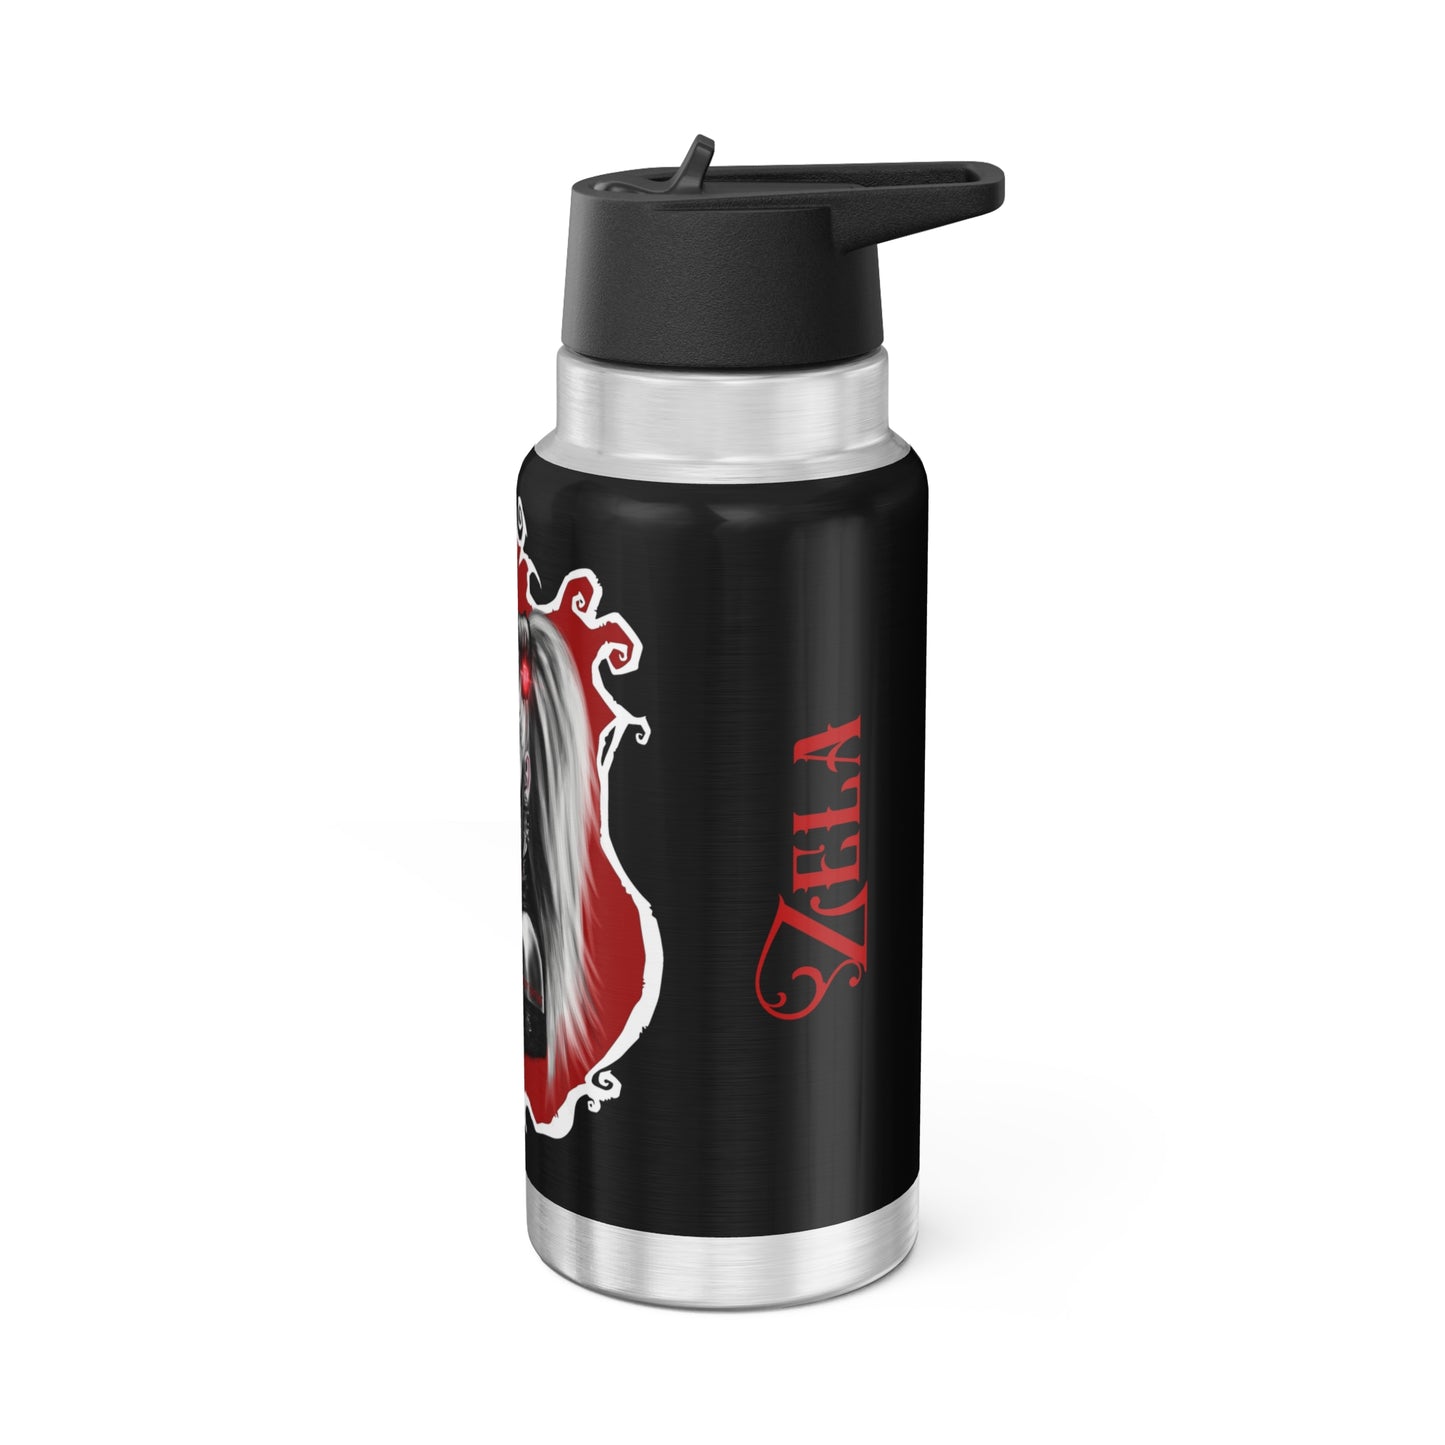 Pretty Zombie Girl Harley Quinn inspired design Black red zombie personalized water bottle